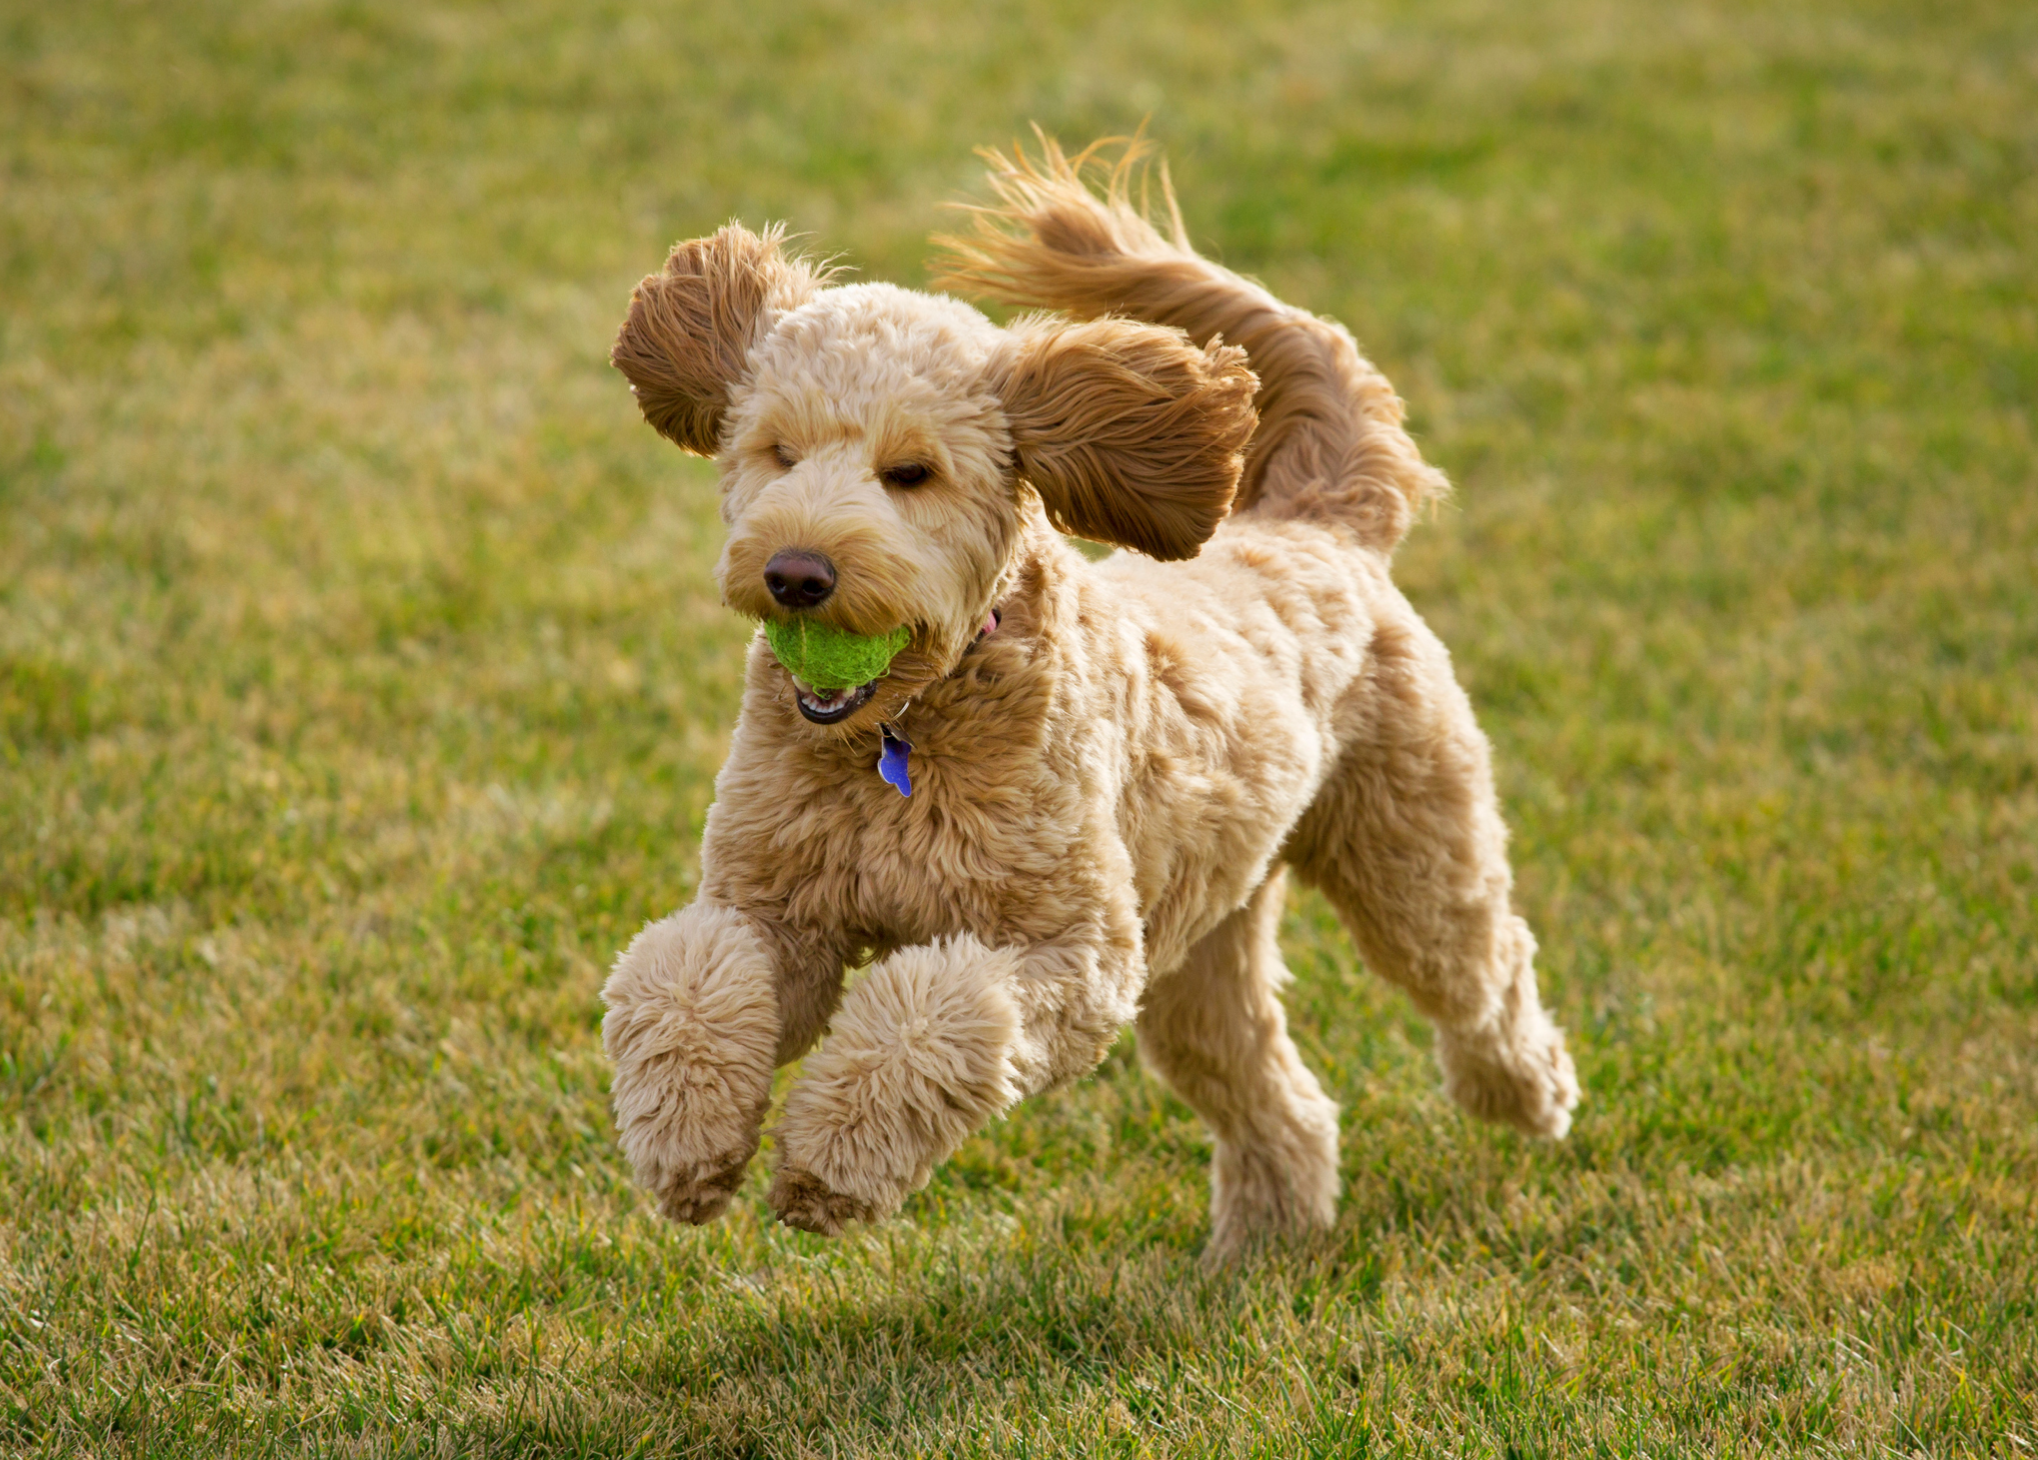 Goldendoodle Guide: Breed Info, Characteristics, & Care Tips